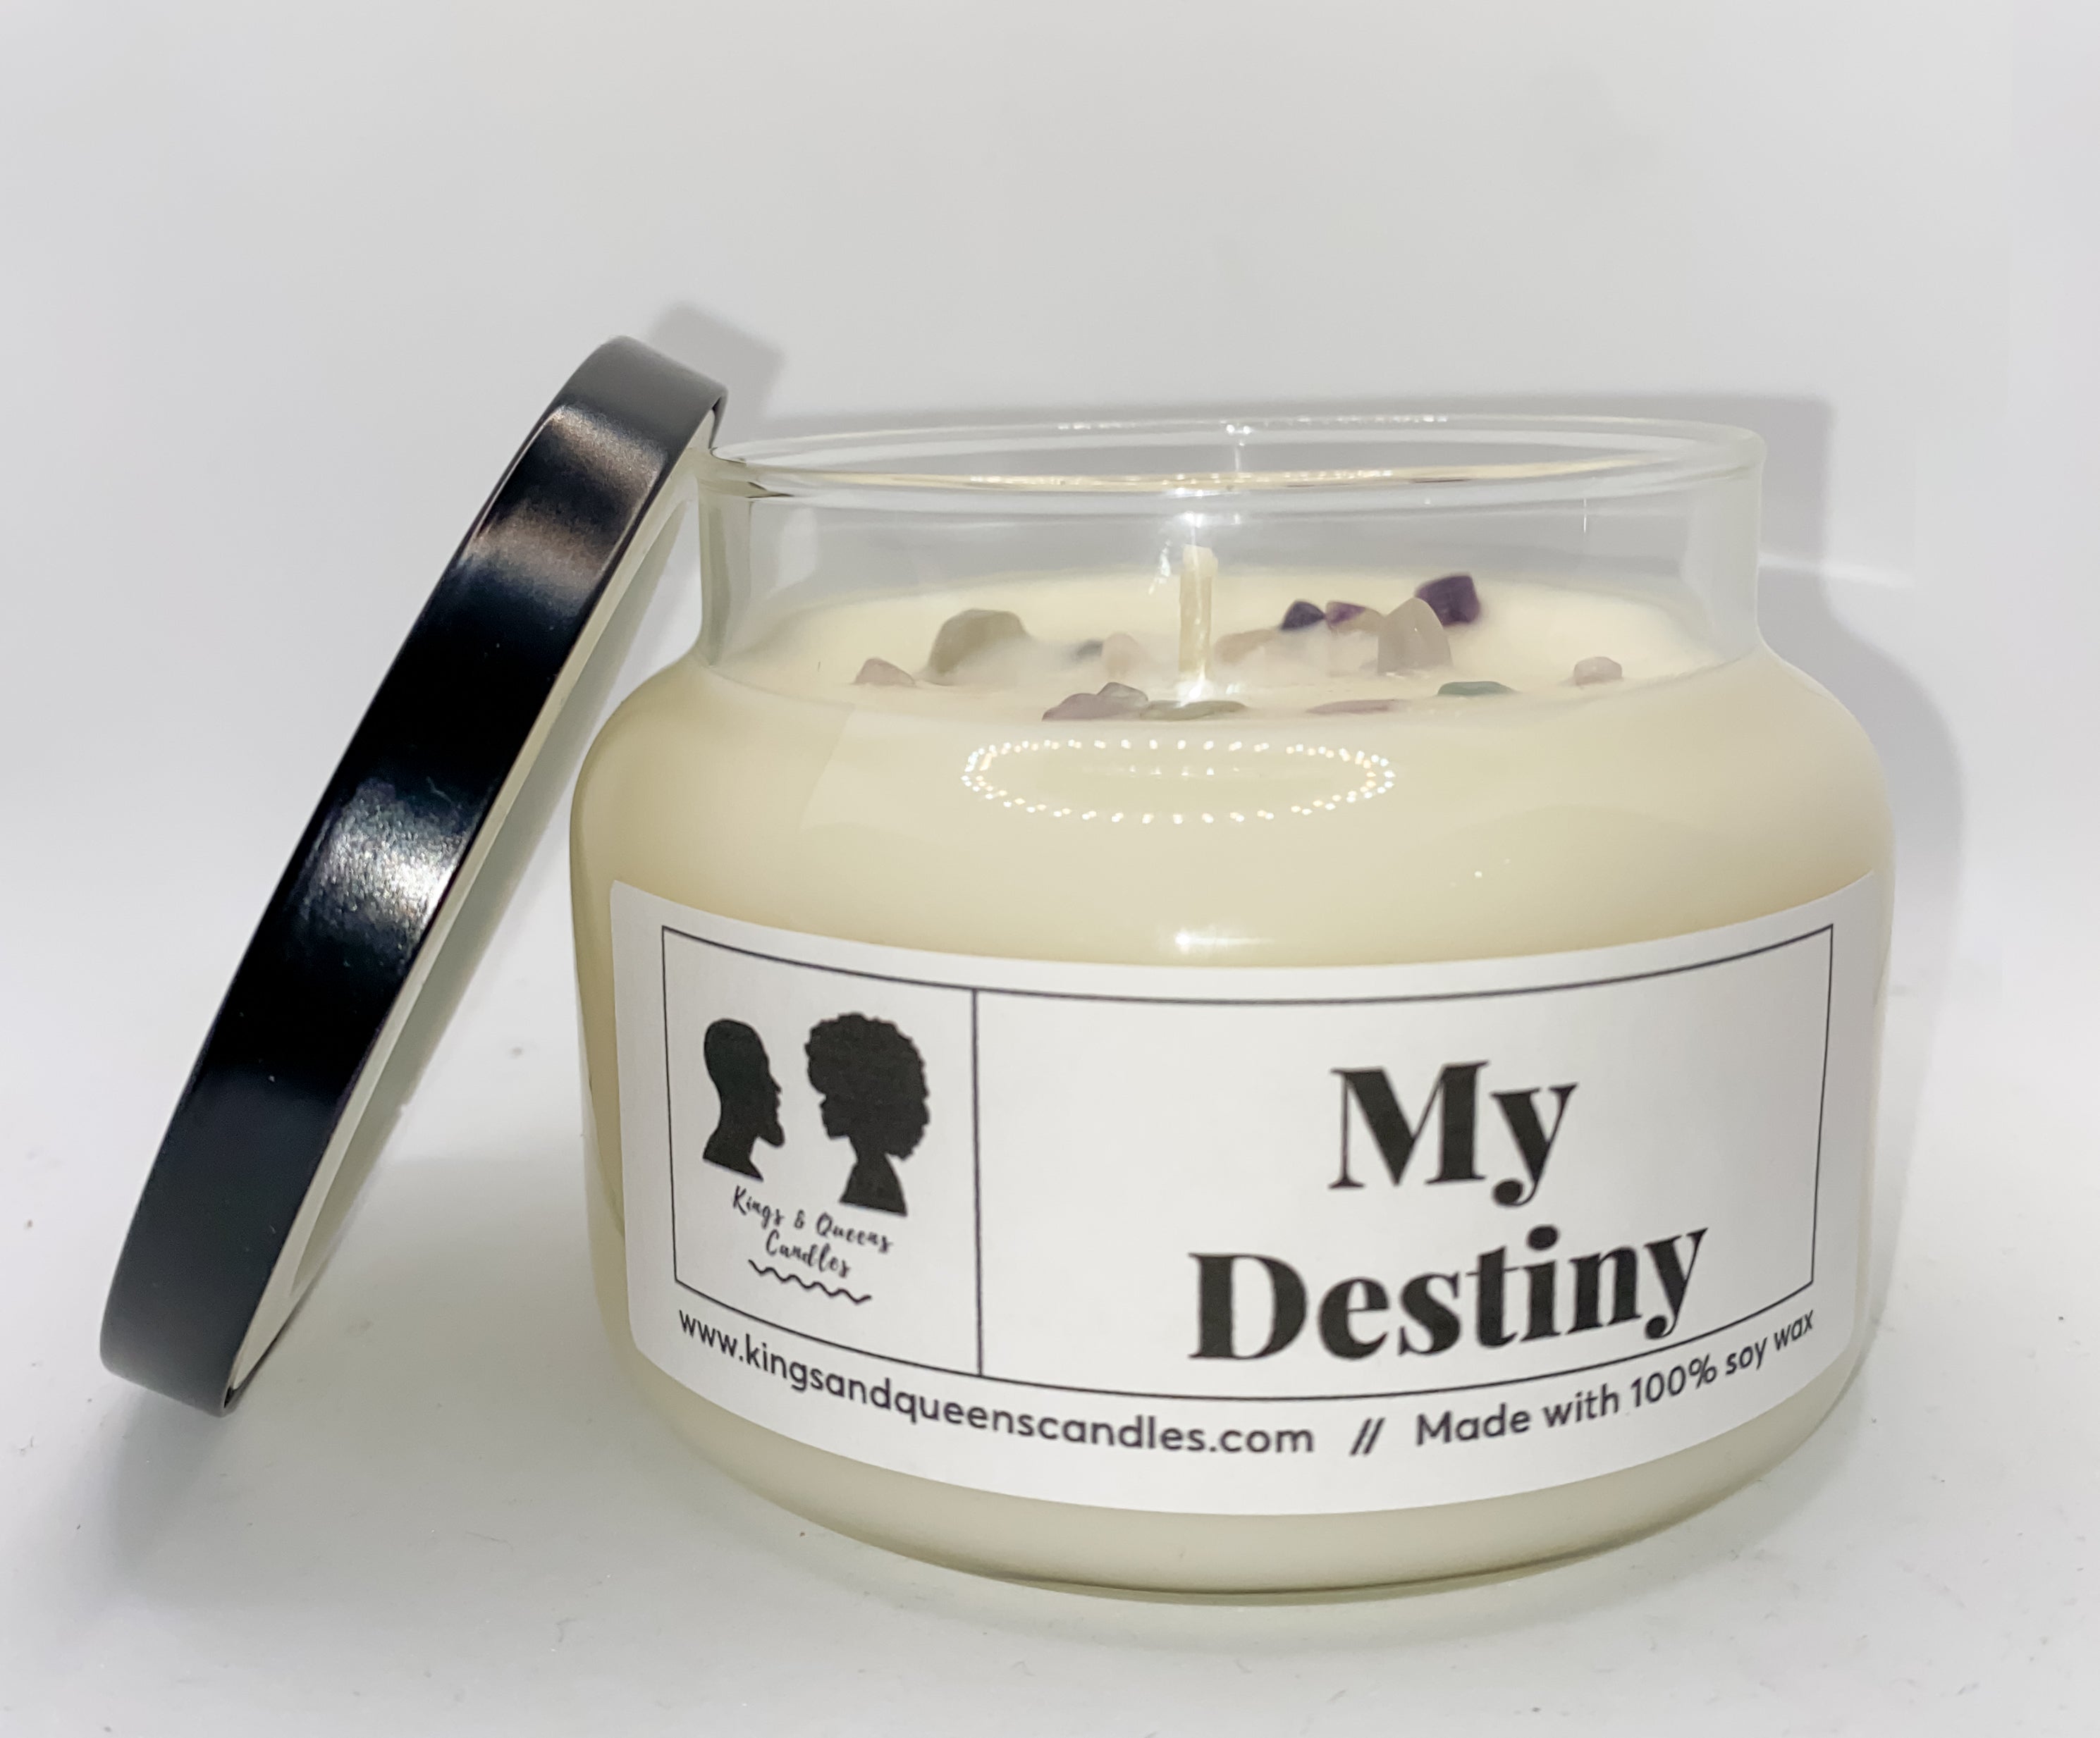 My Destiny - Kings and Queens Candles